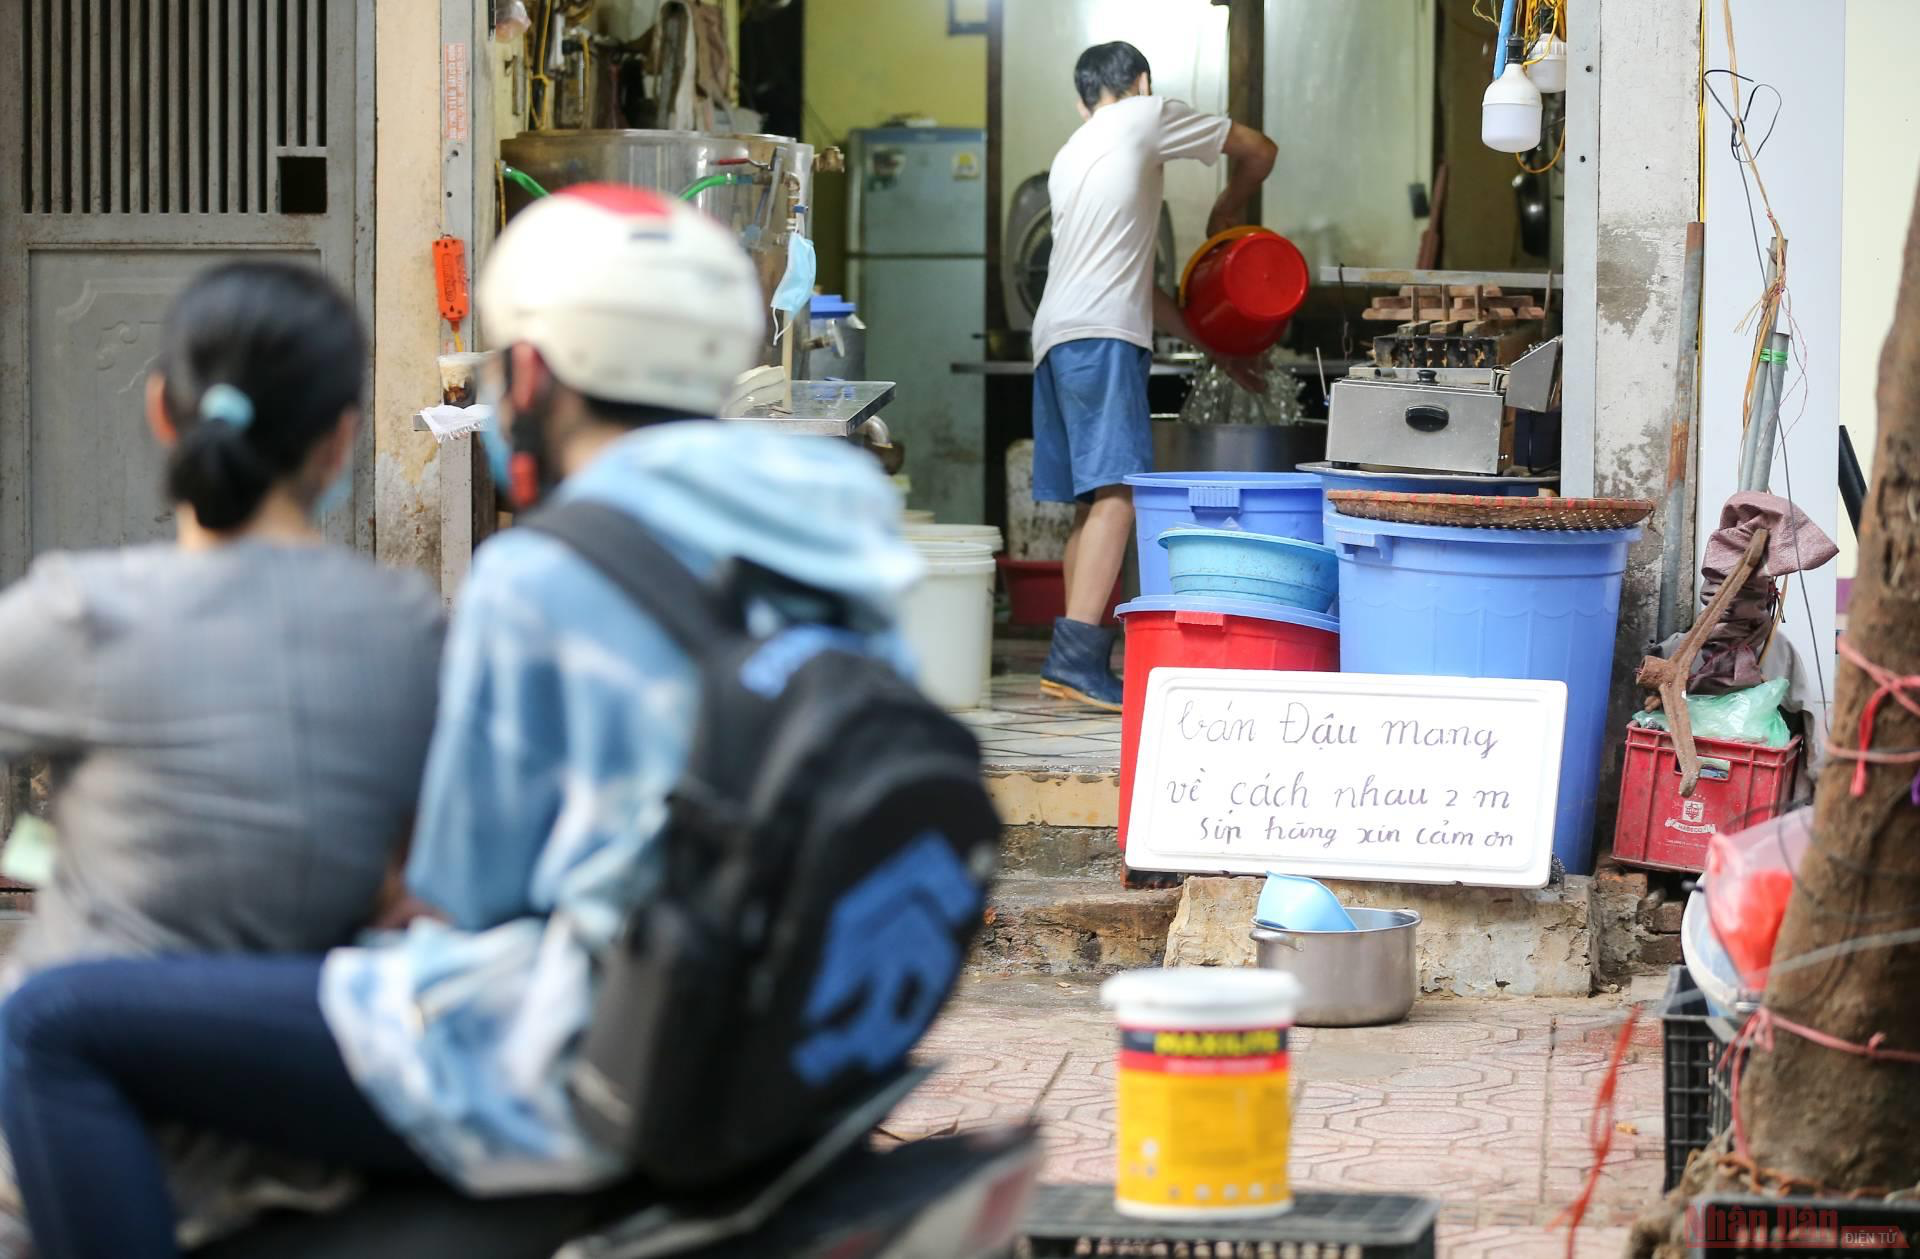 In photo: Shopping in Covid-19 - Put money in bucket, goods in pot